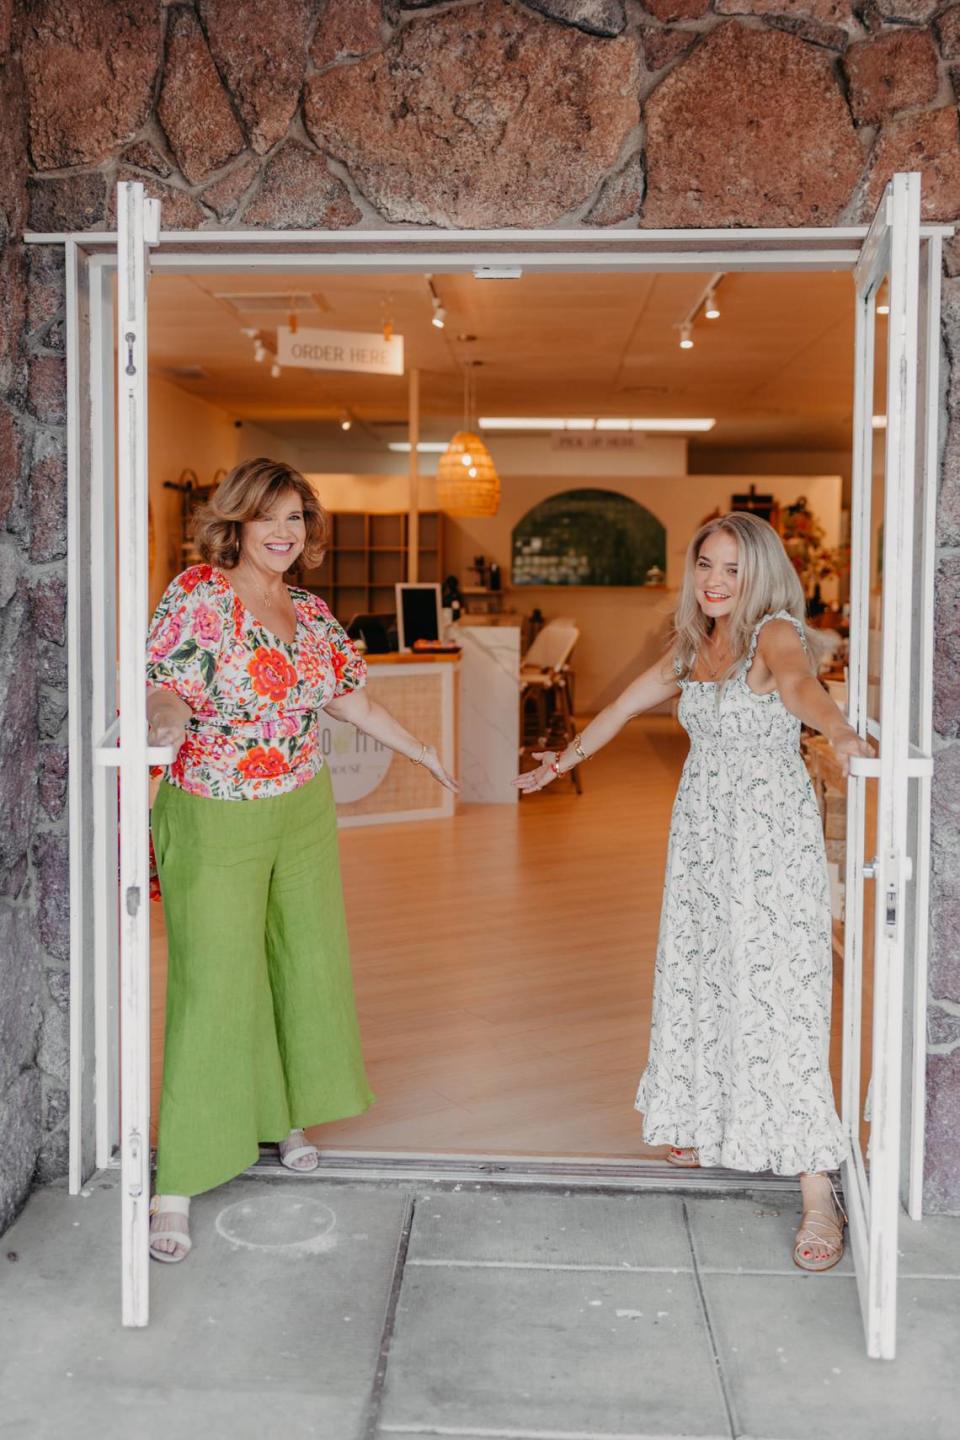 Roberta Chalaris and Marina De Albuquerque opened Roma House, a charcuterie, deli, wine and grocery at 617 The Parkway, Richland.